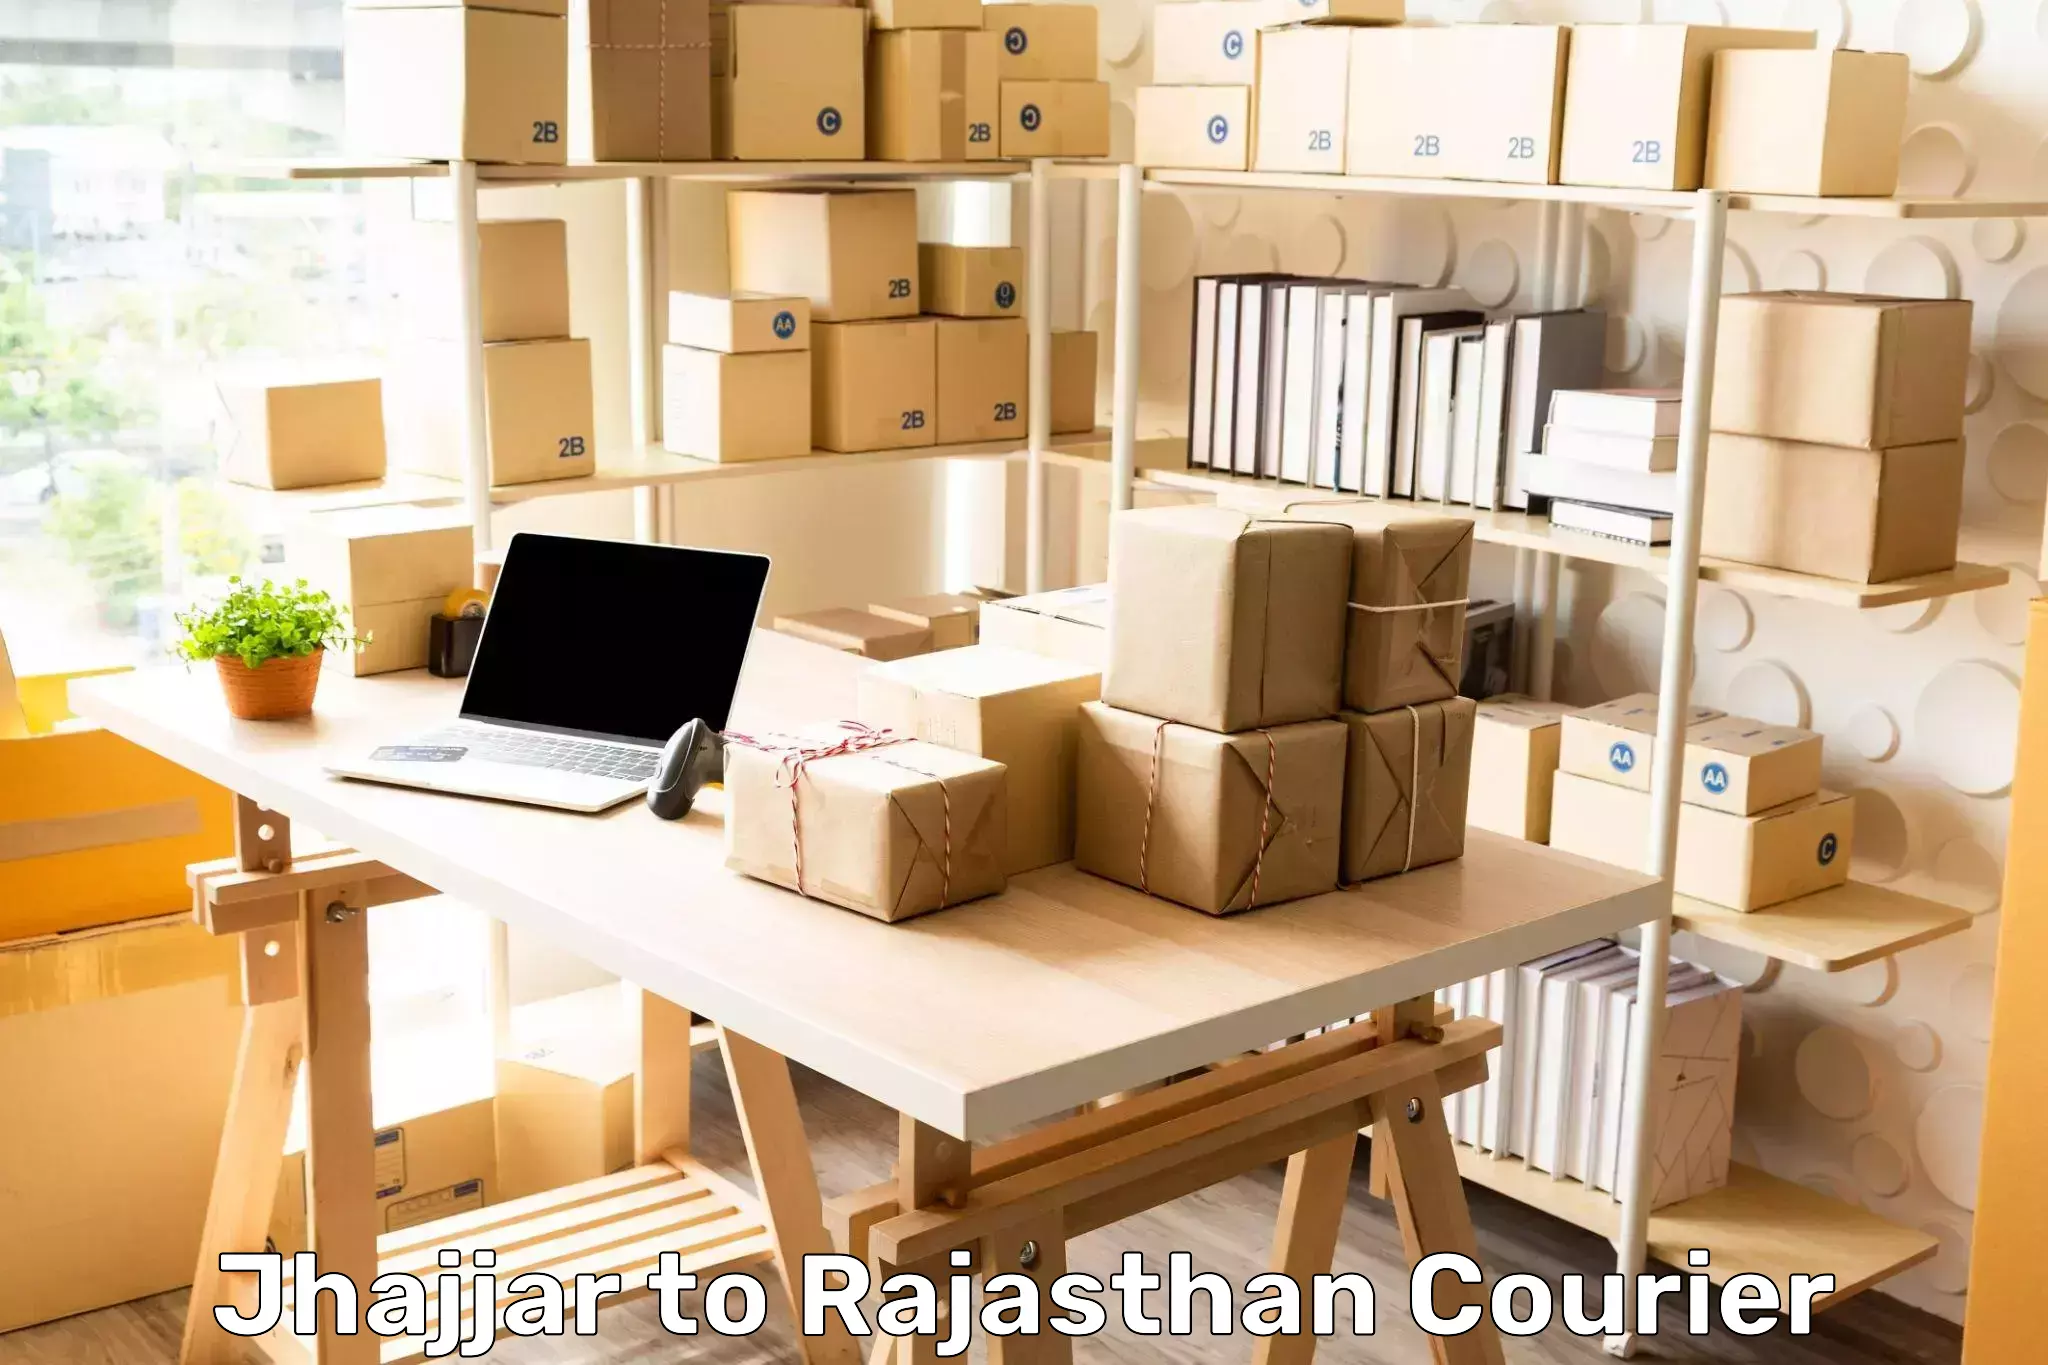 Subscription-based courier Jhajjar to Udaipur